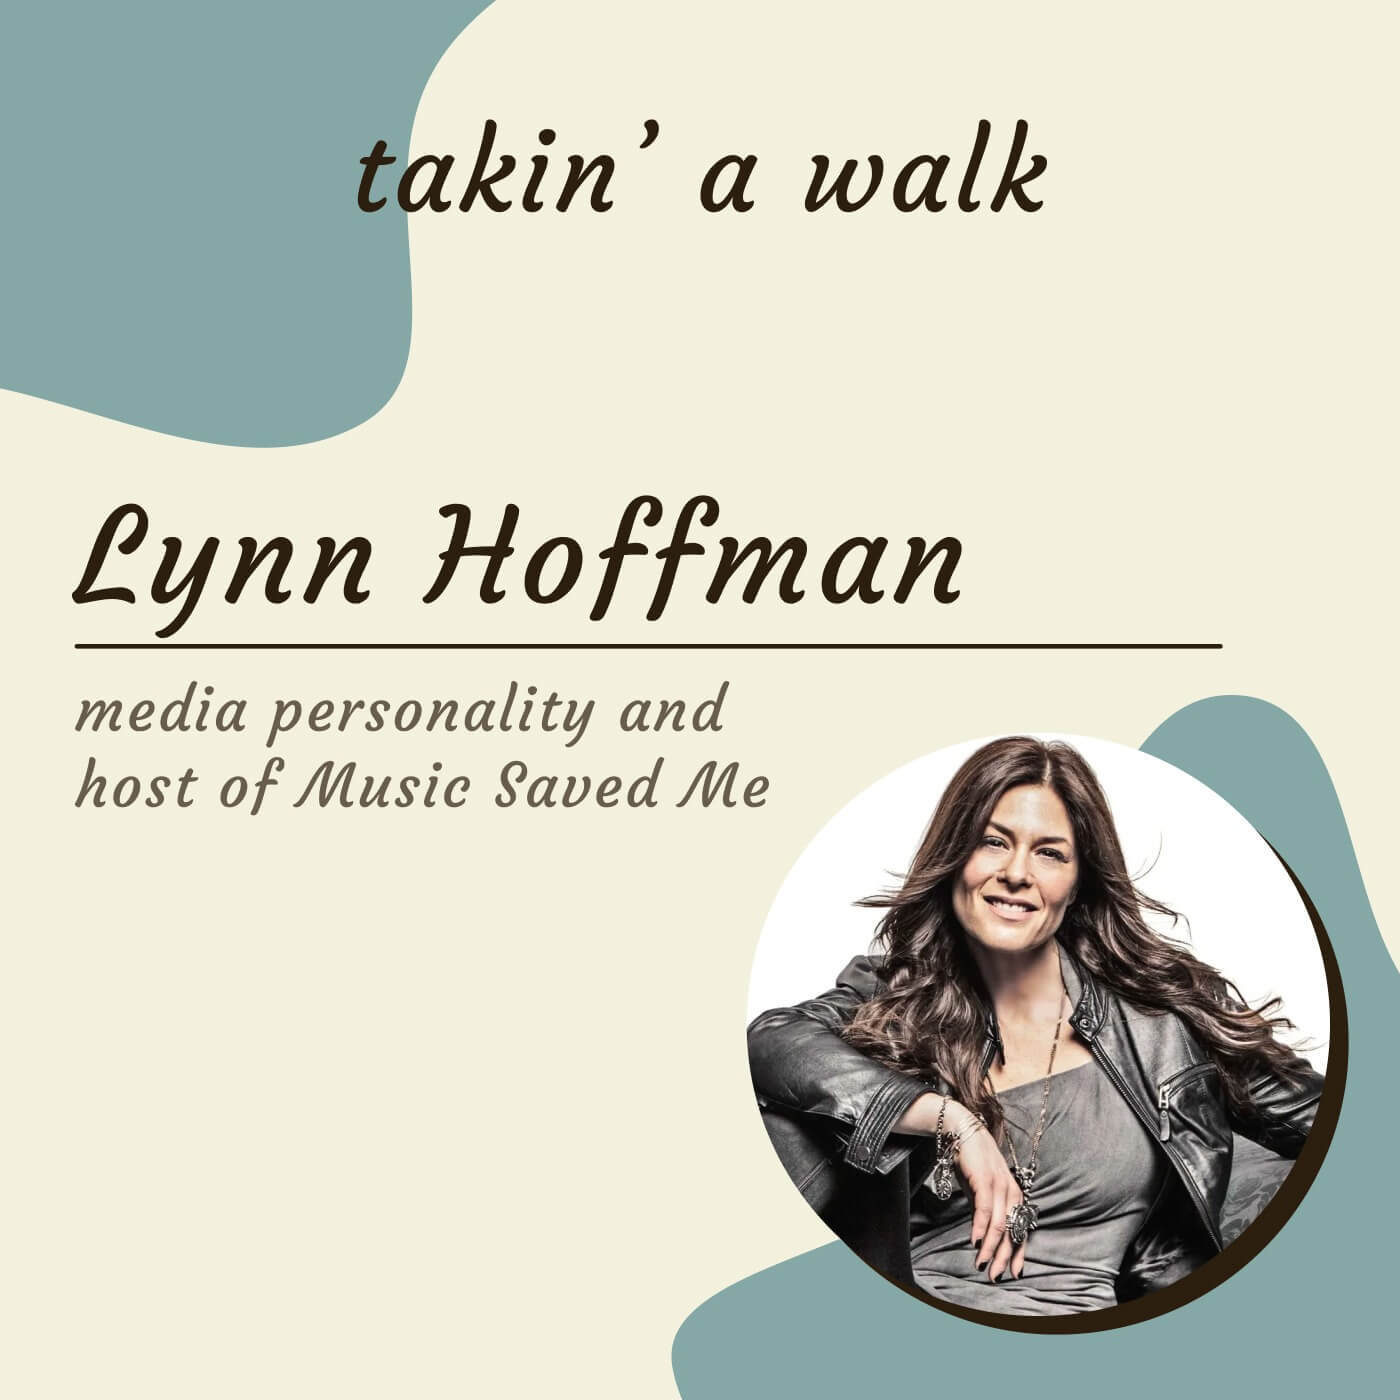 Lynn Hoffman - Media Personality and Host of The Music Saved Me Podcast